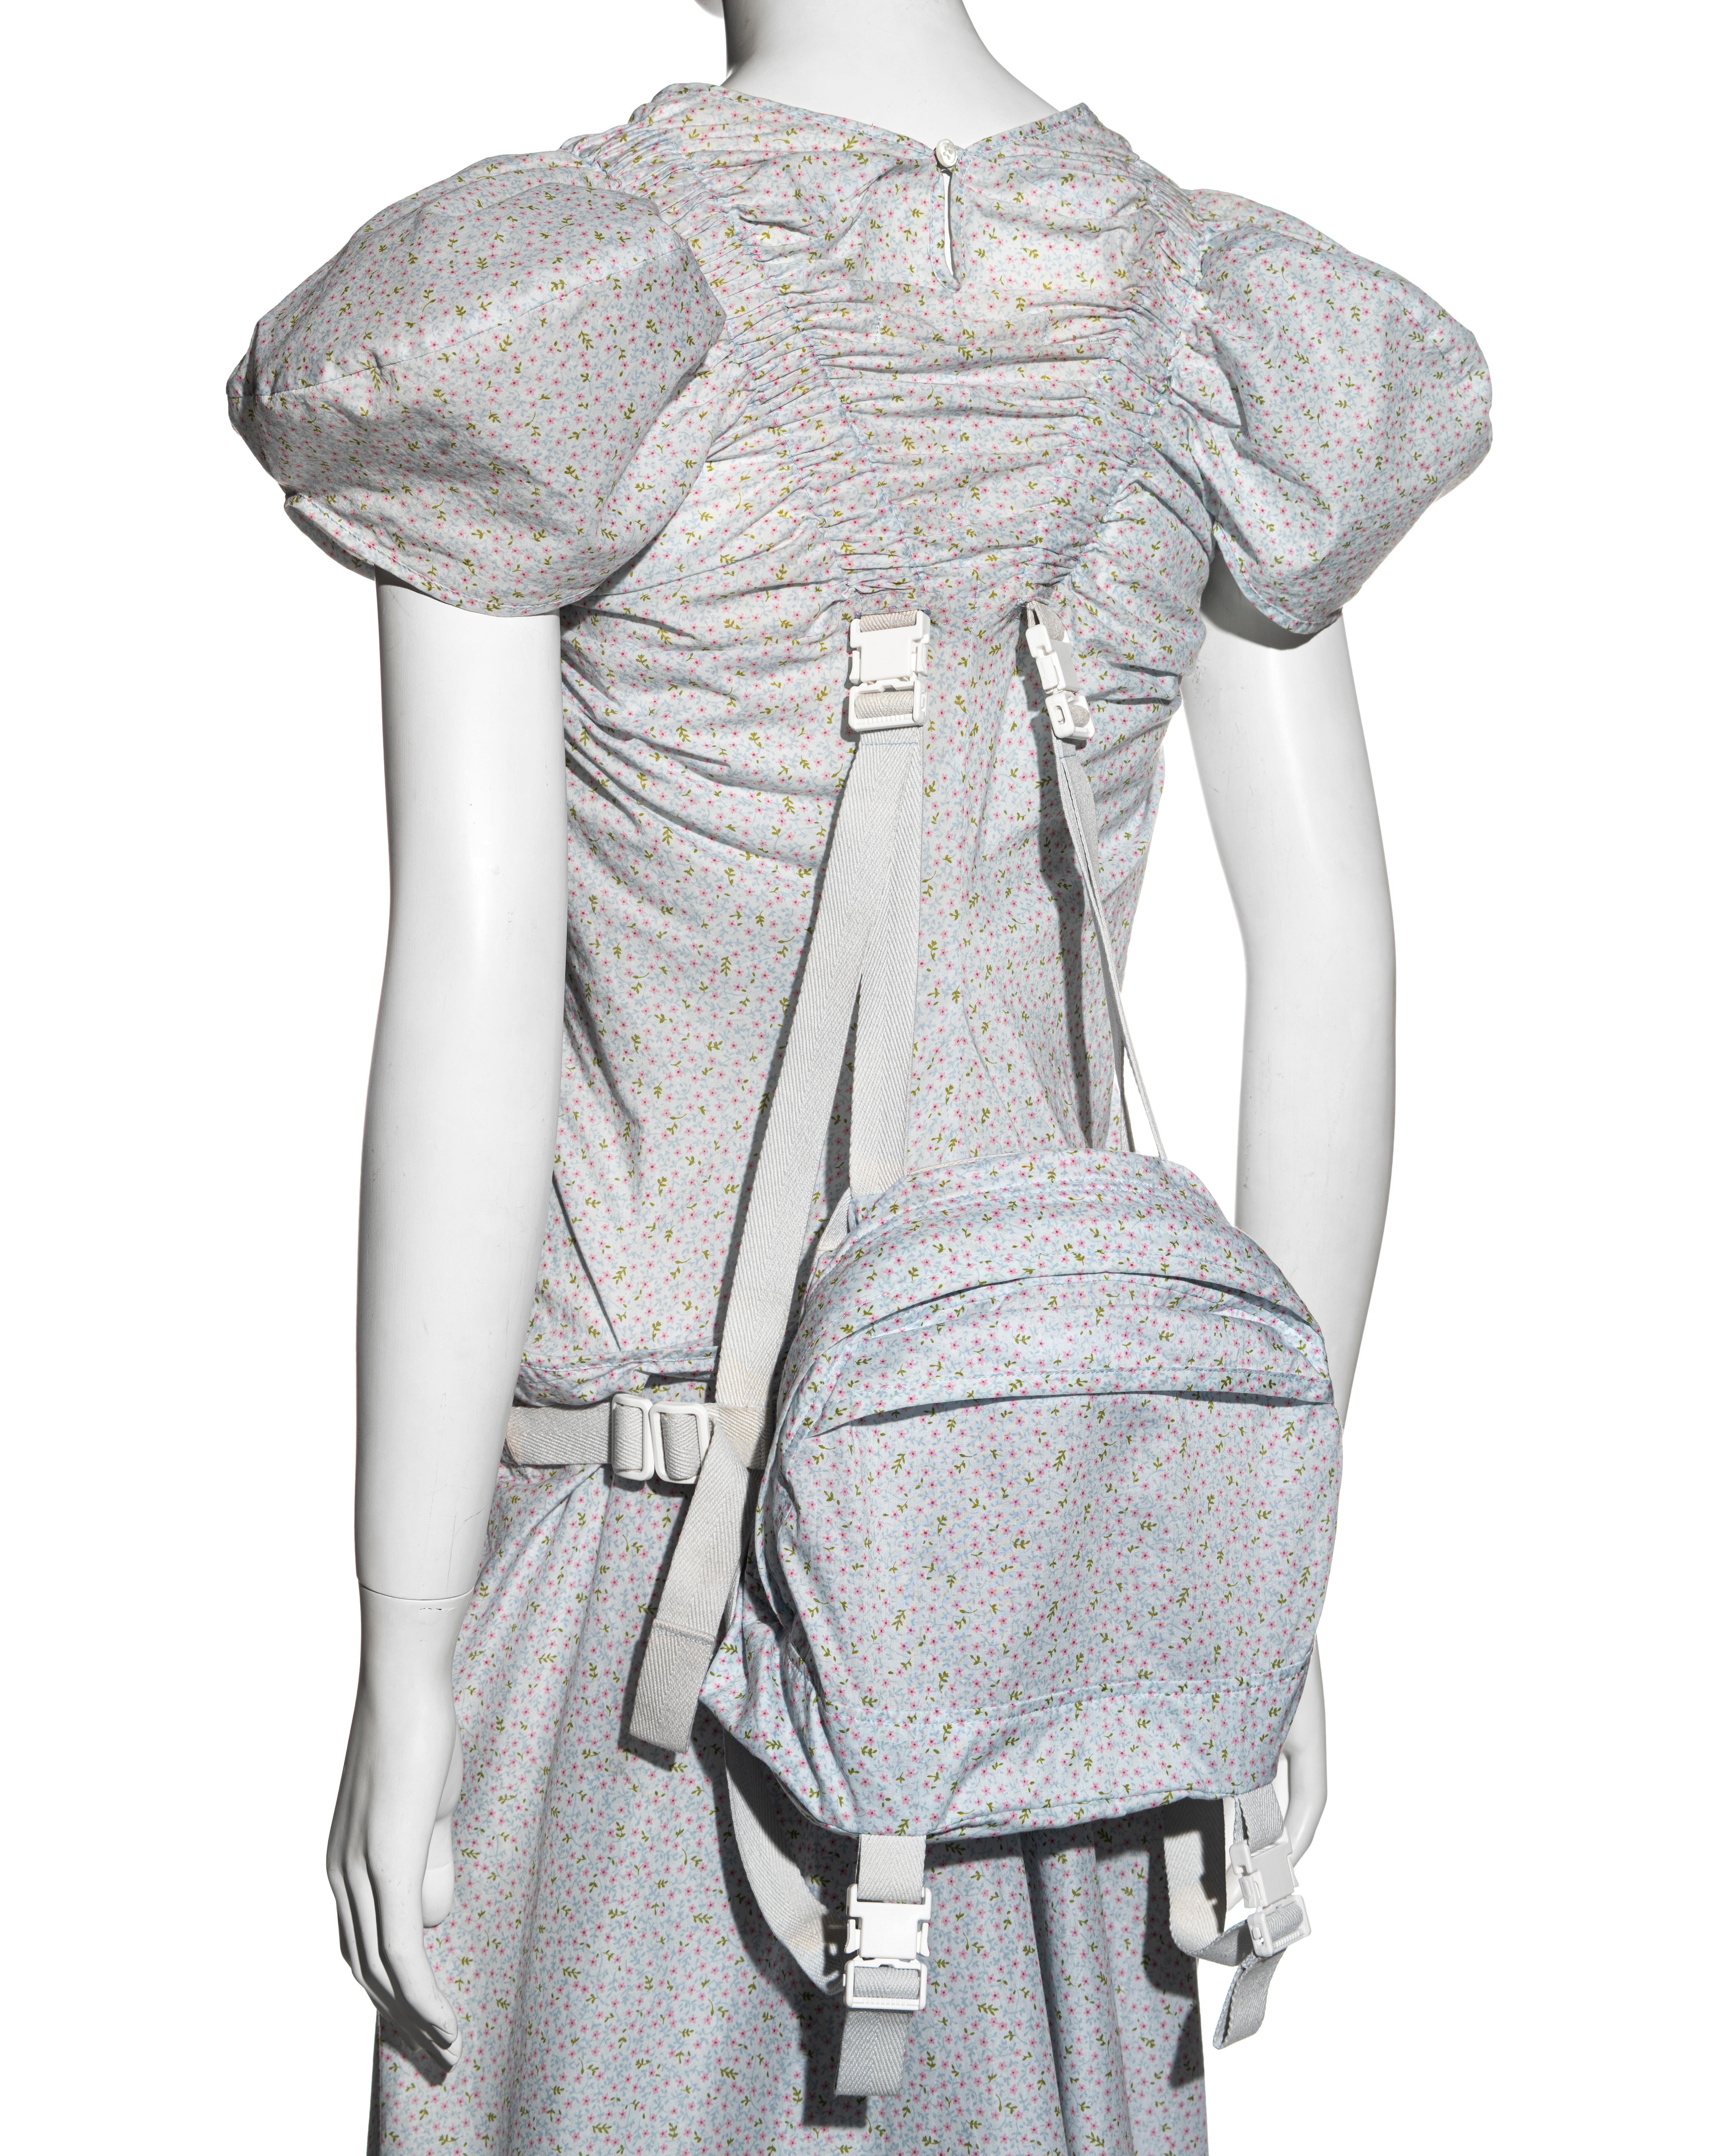 Junya Watanabe floral cotton dress with harness straps and backpack, ss 2003 For Sale 1